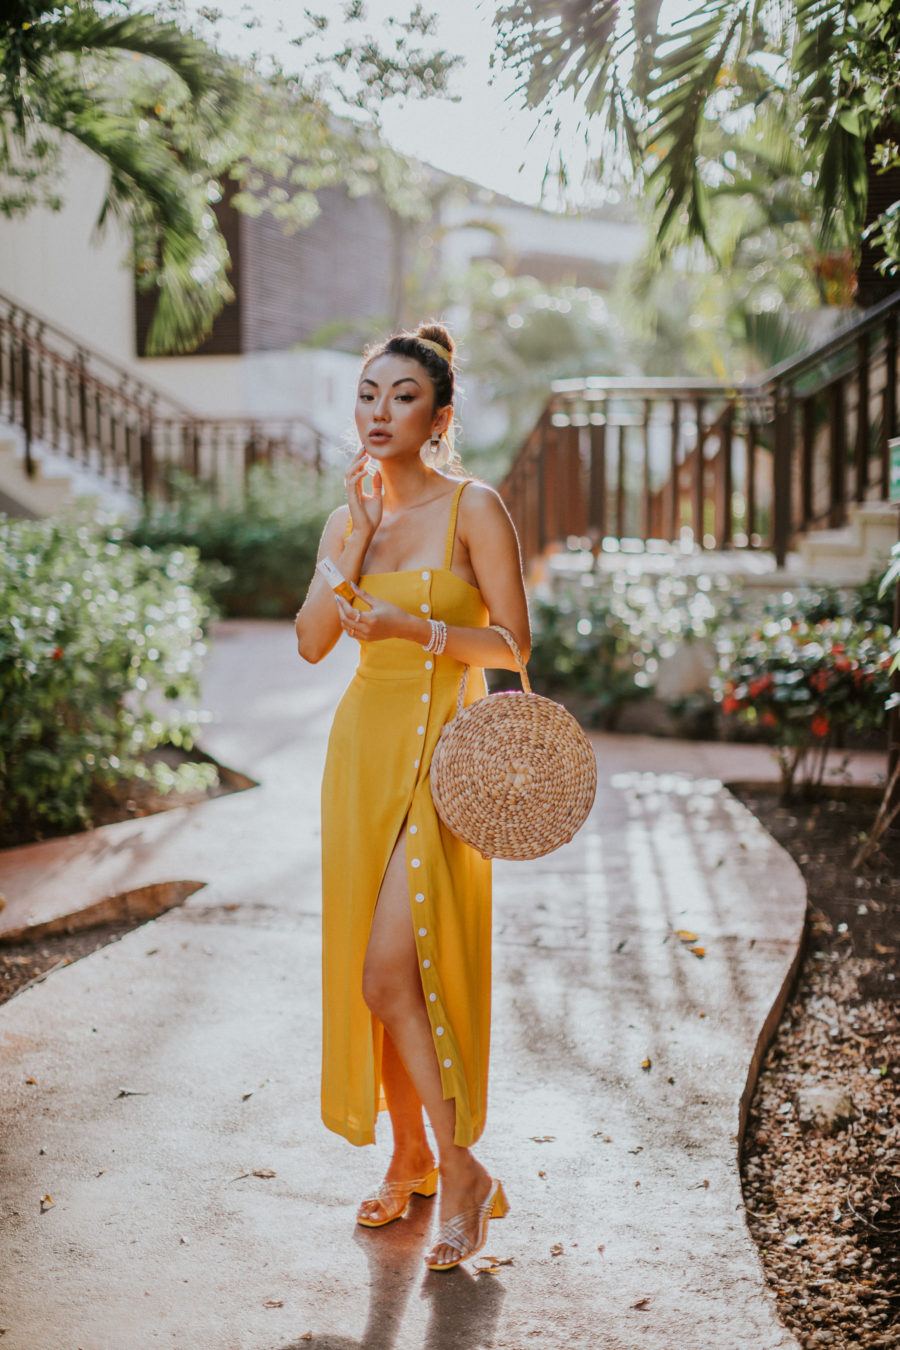 How to Get Smoother and Brighter Skin - Clinique Fresh Press, Clinique Vitamin C Serum, Fairmont Mayakoba, yellow dress, straw circle bag // Notjessfashion.com